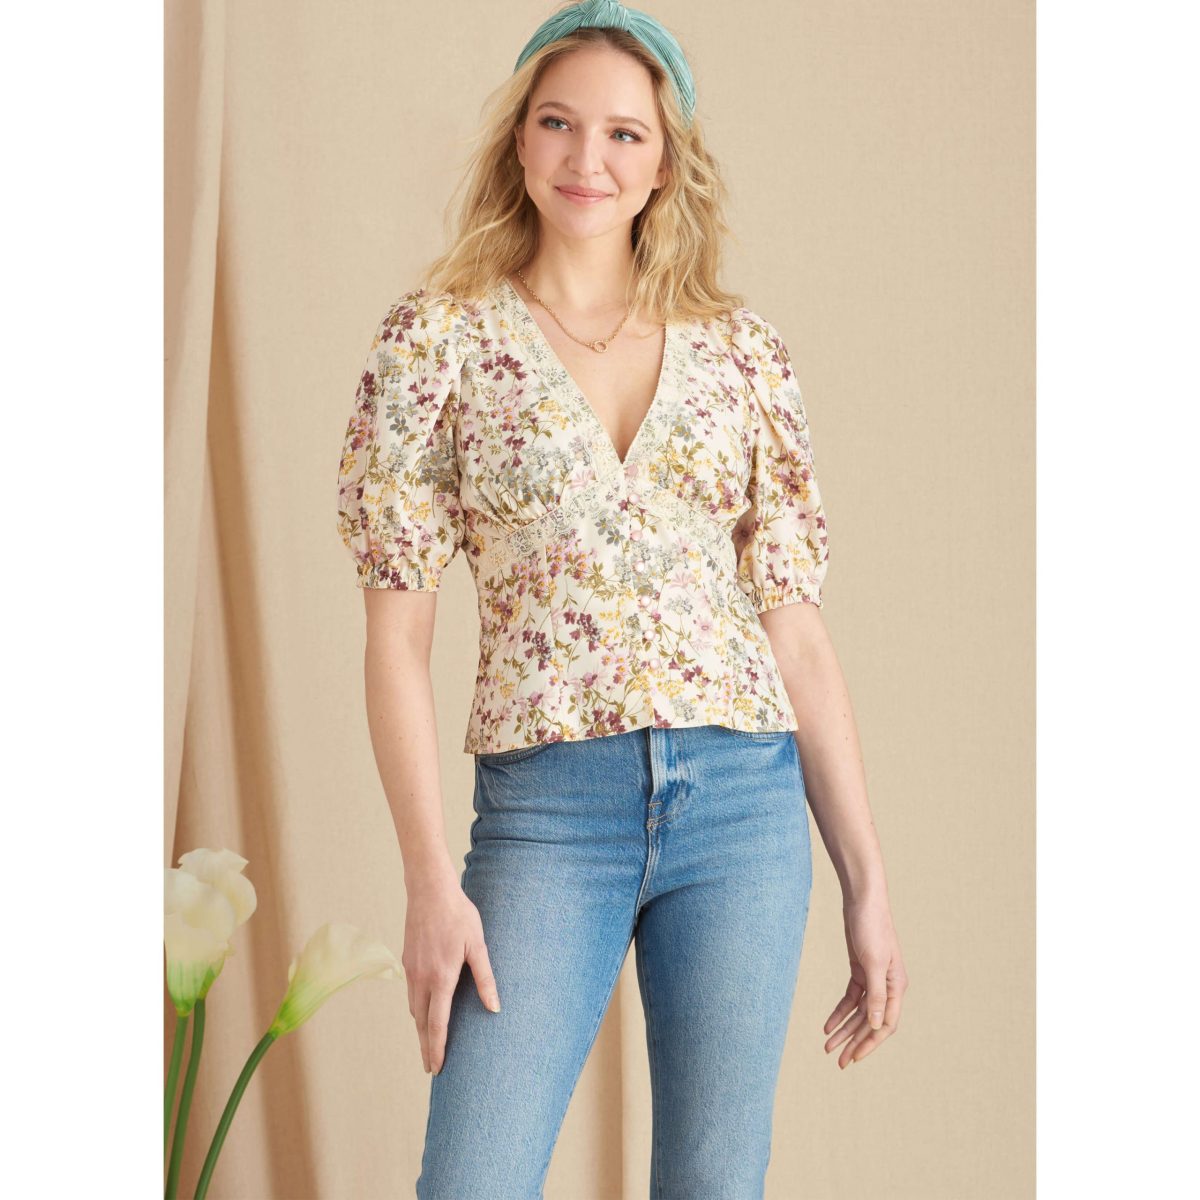 Simplicity Sewing Pattern S9606 Misses' Blouse